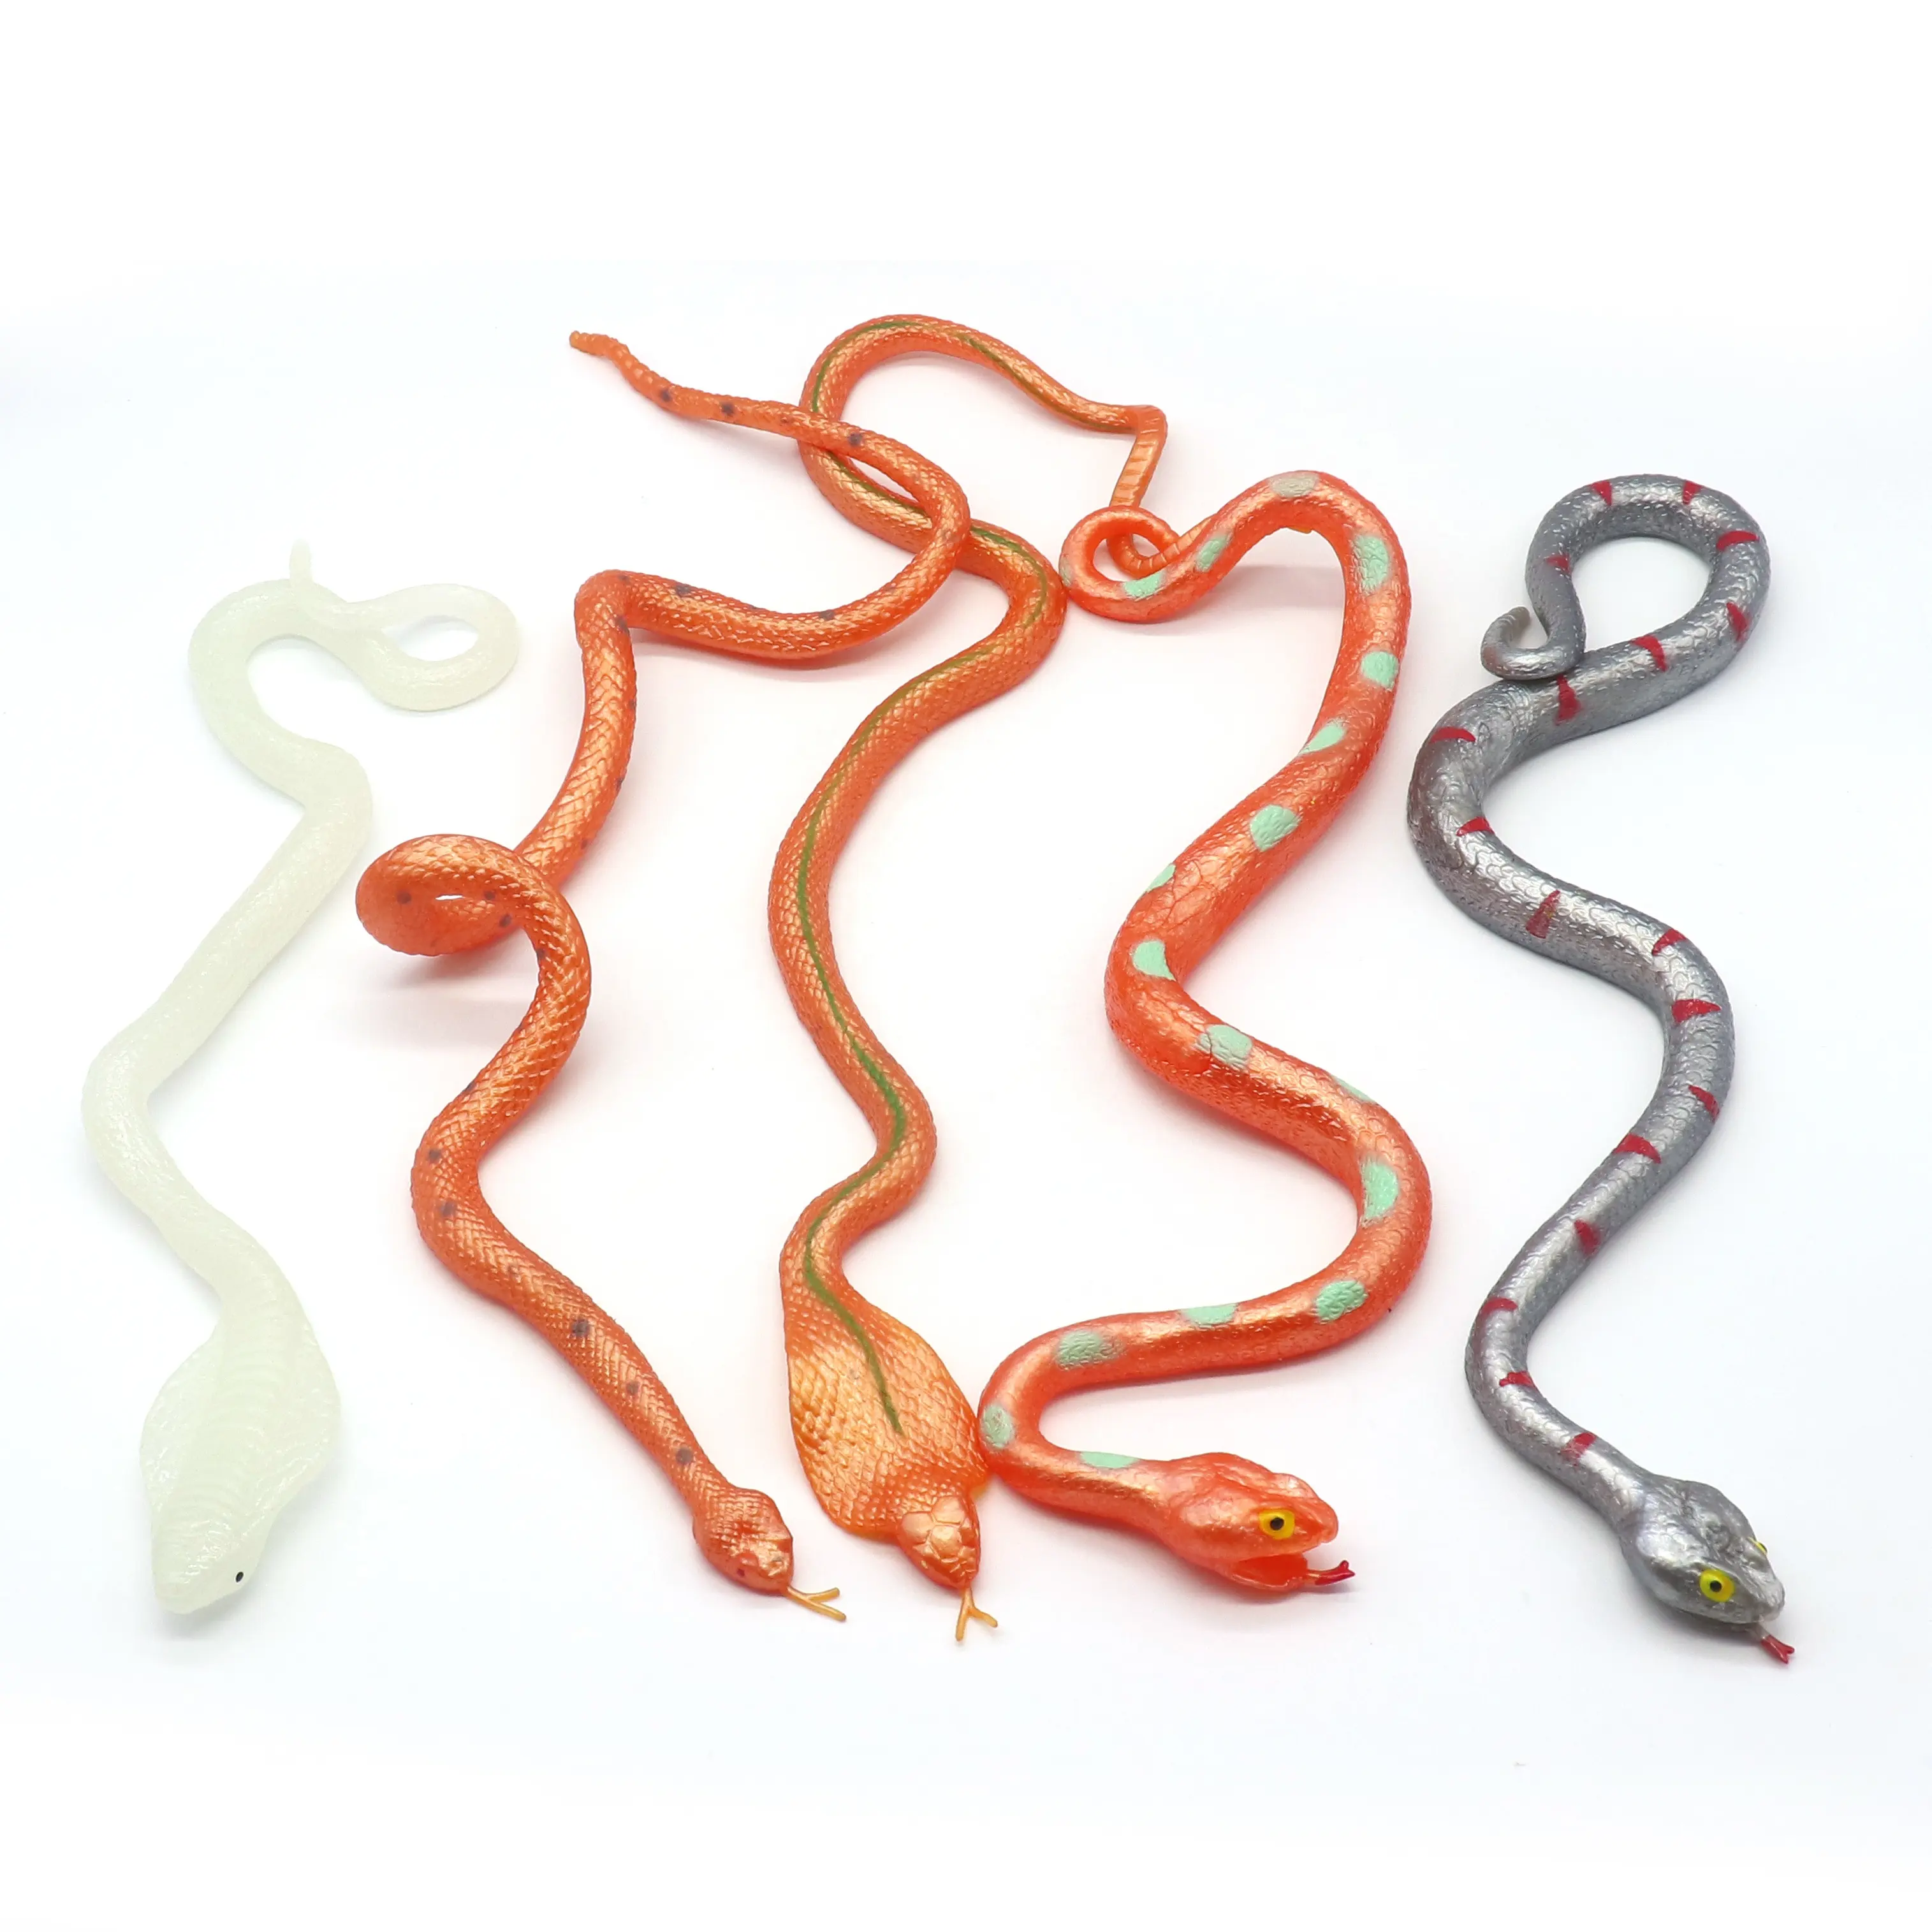 The Simulation of High Quality TPR Snake Animal Toys